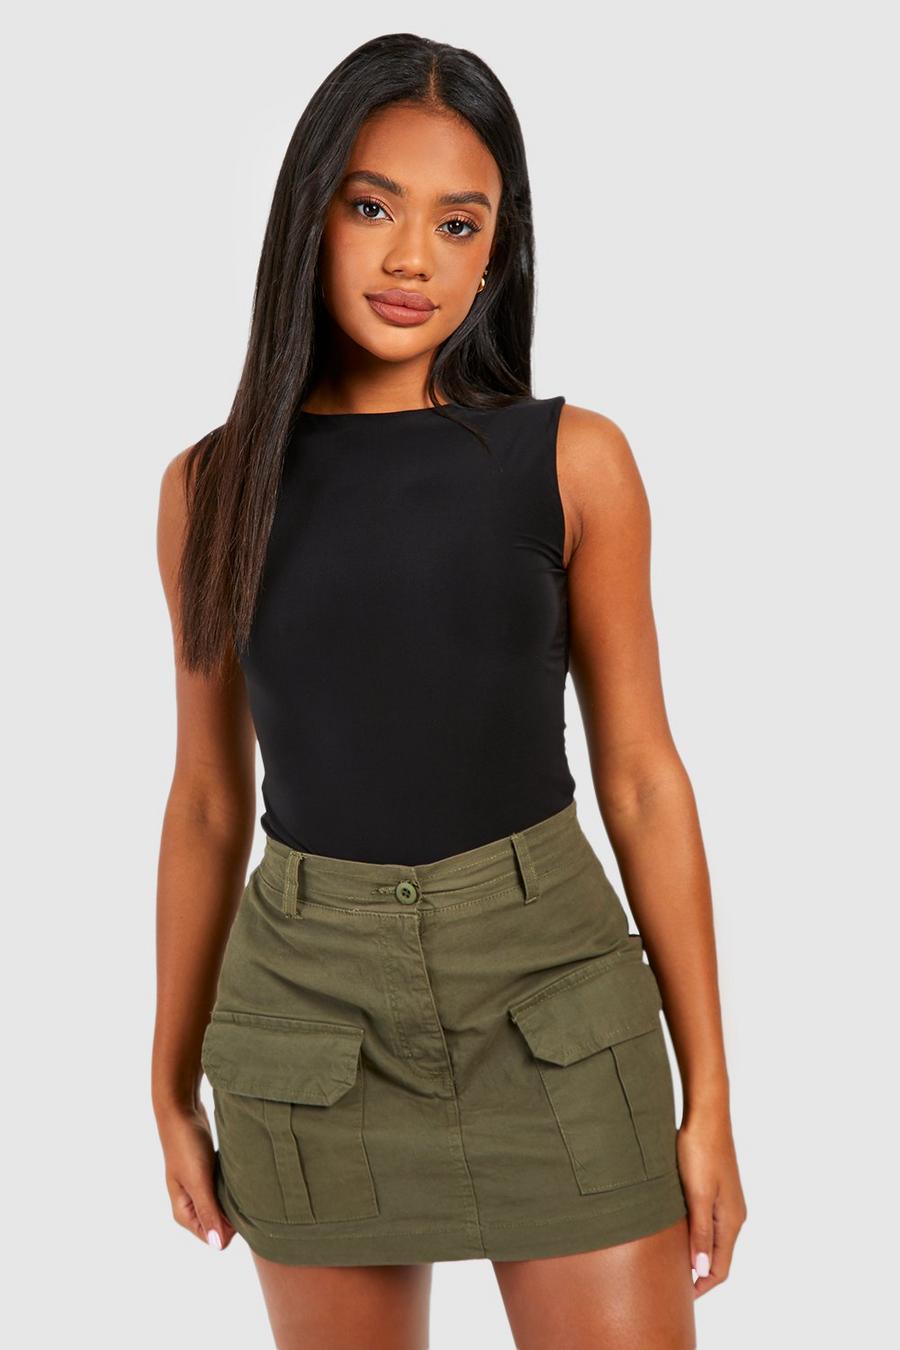 Ruched Satin Bodysuit Going Out Party Top Black –